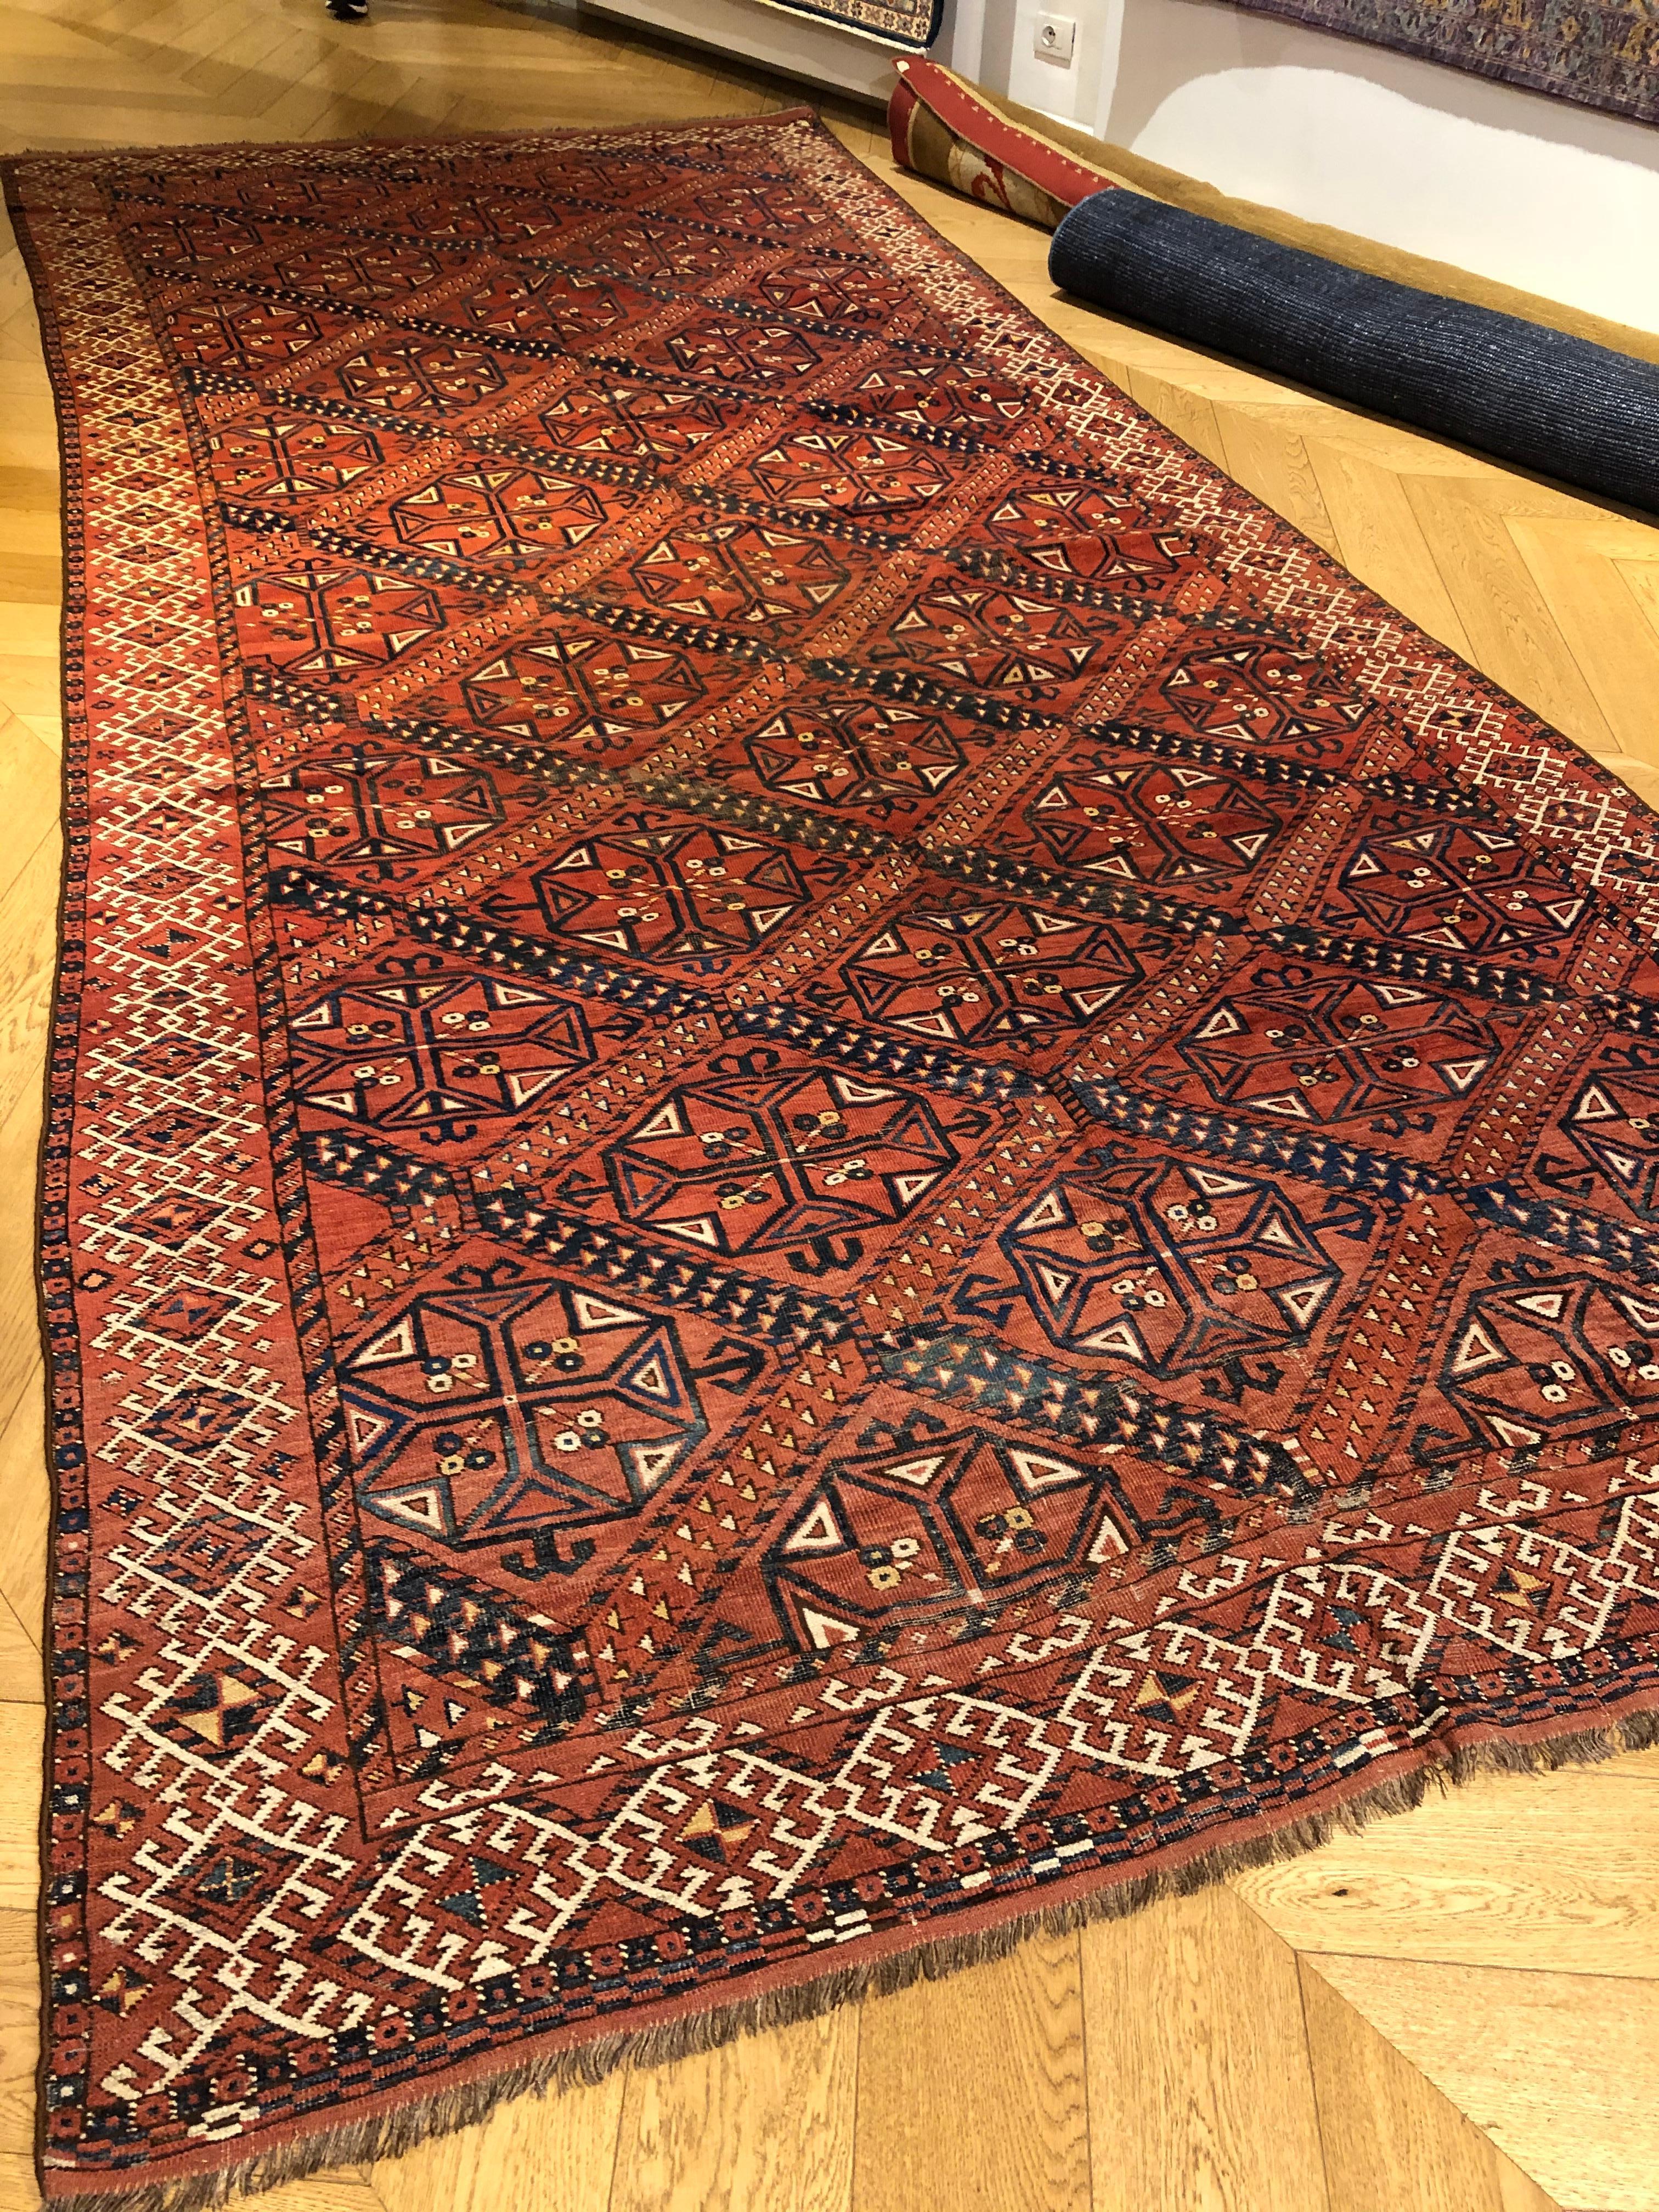 Hand-Knotted 19th Century Red Blue White Geometric Archaic Polygonal Turkmen Rug, about 1870 For Sale